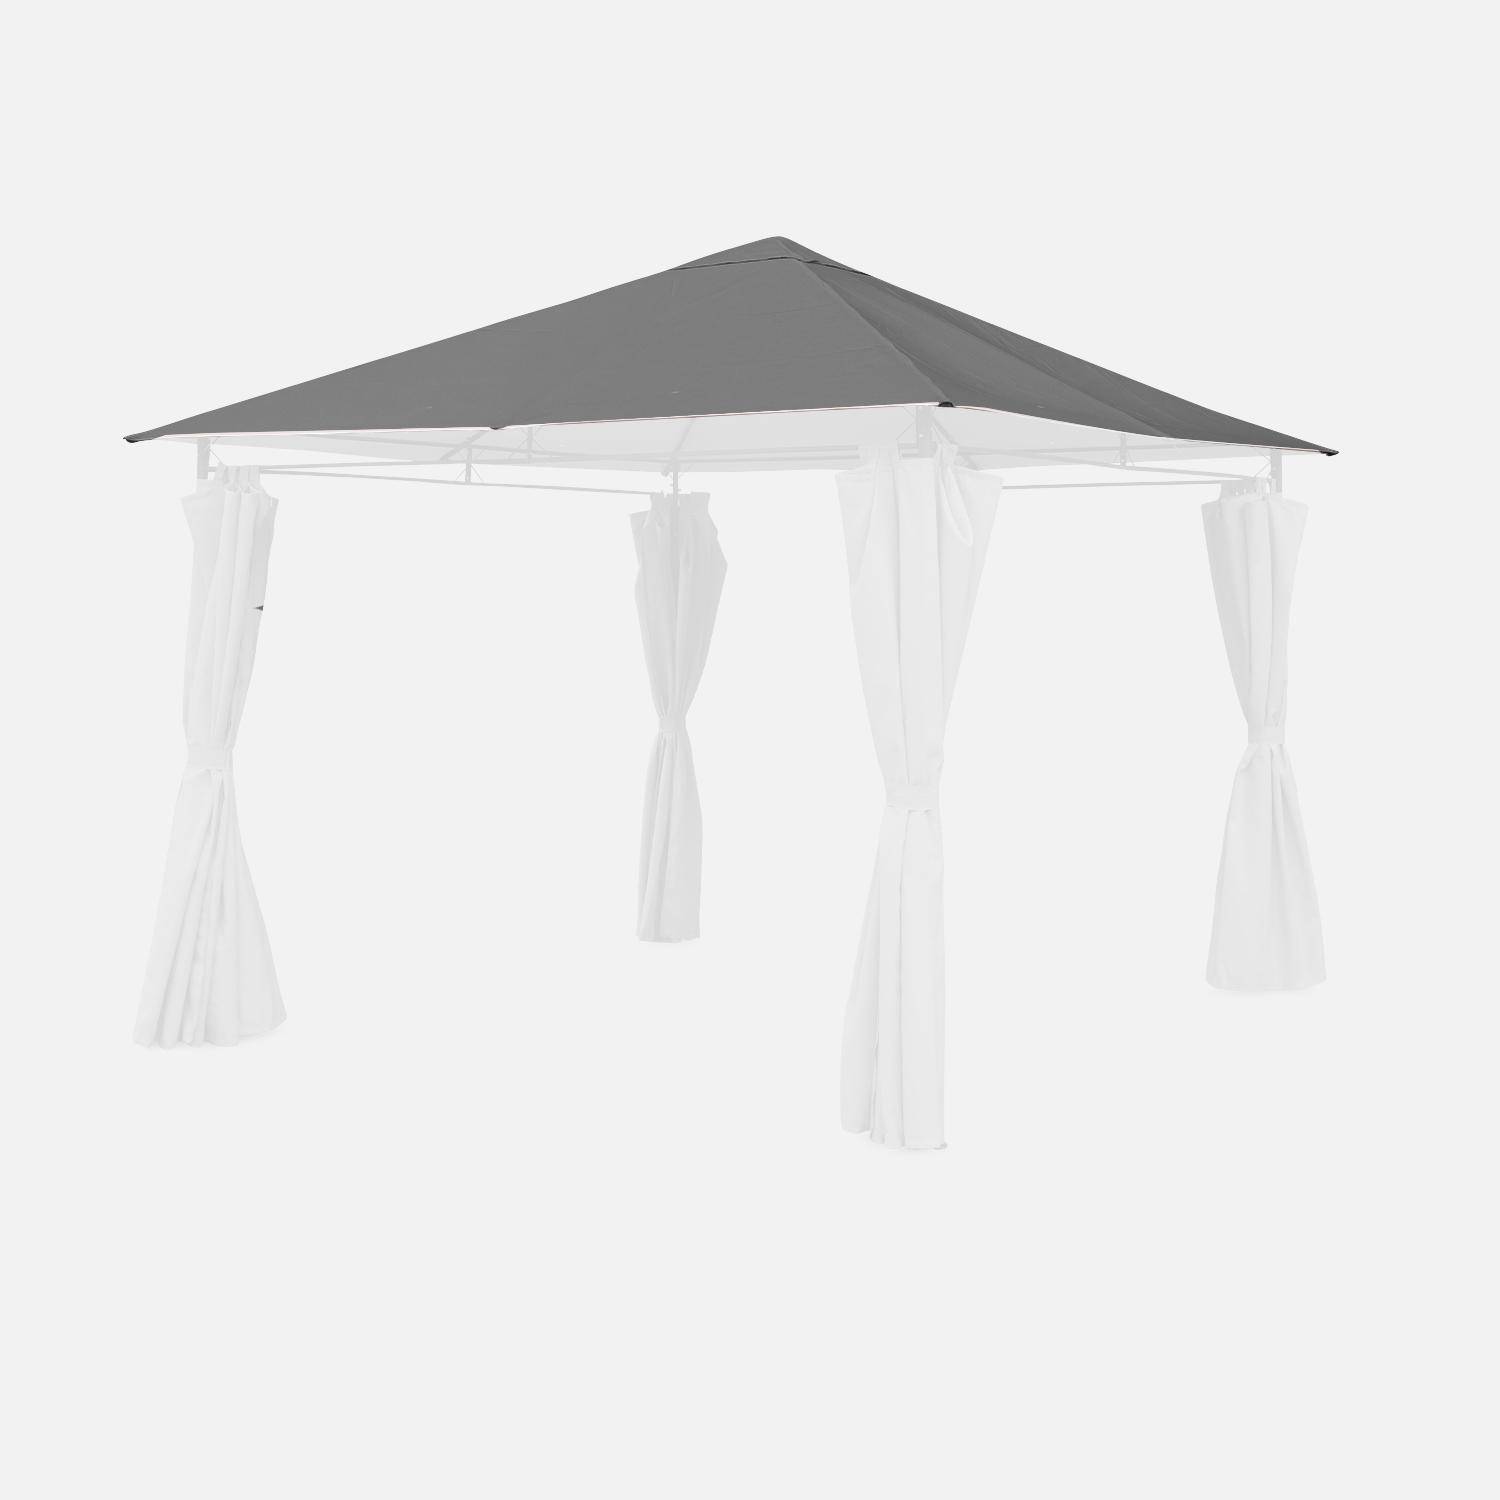 Grey roof cover for Elusa 3x3m arbour - pergola cover, replacement cover Photo1